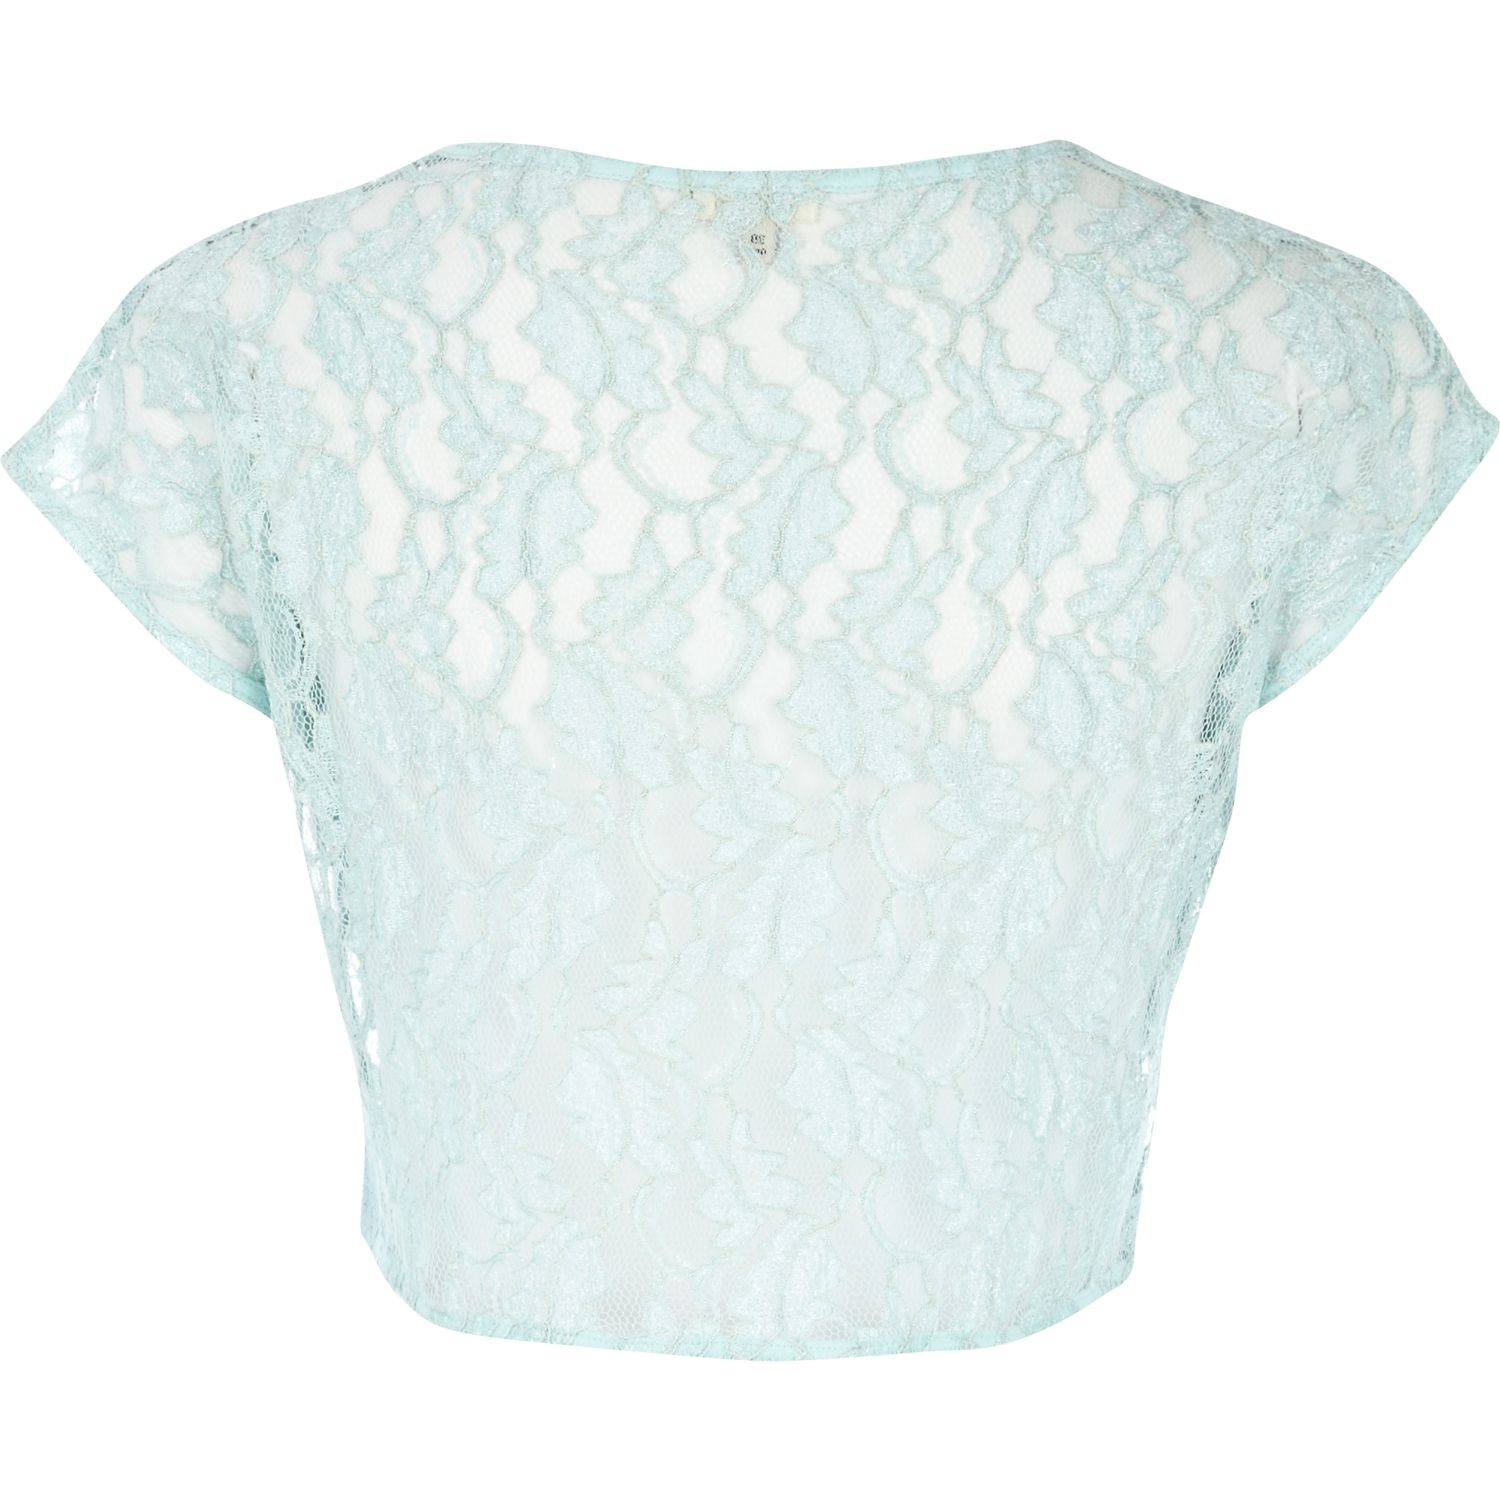 River Island Light Blue Lace Sequin Embellished Crop Top in Blue - Lyst1500 x 1500